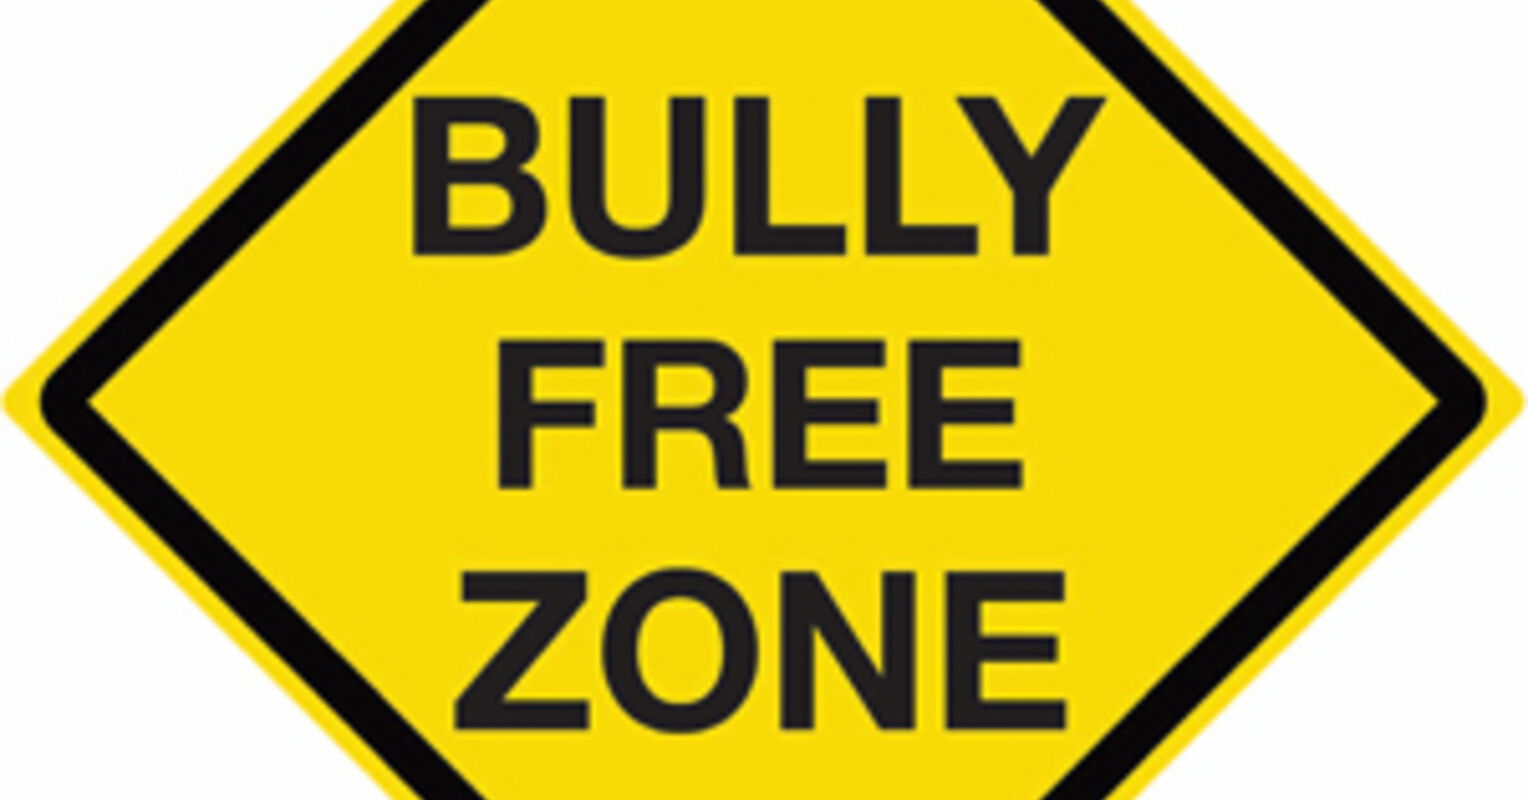 What Tactics Motivate Bullies to Stop Bullying? | Psychology Today Canada